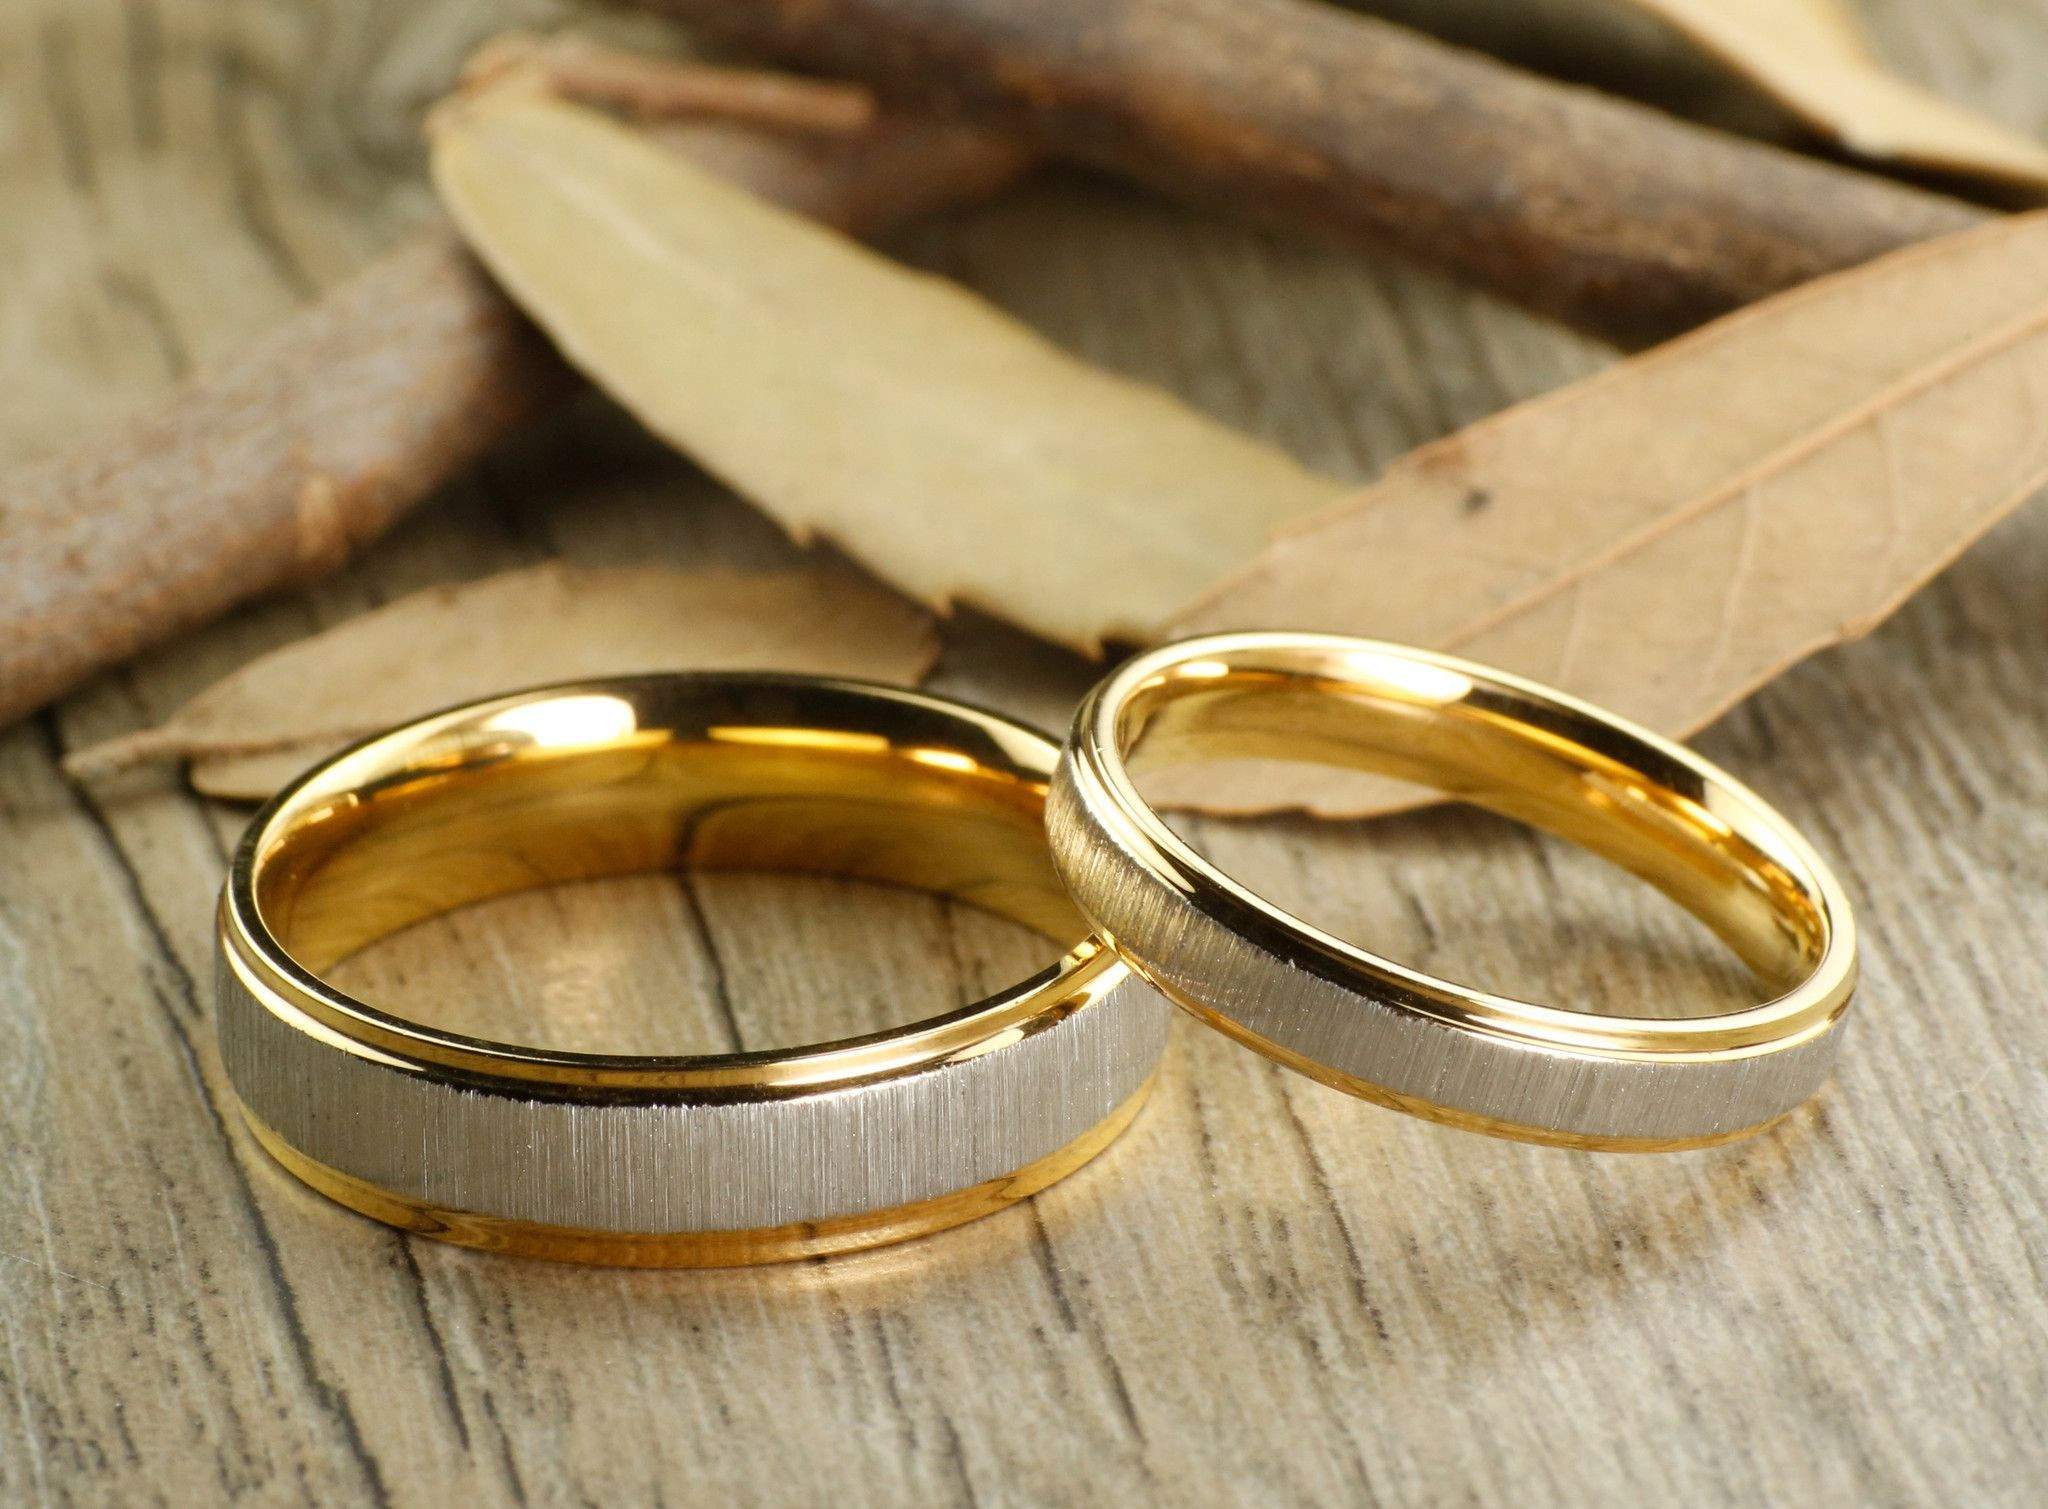 The Best Gold Wedding Rings Sets for Him and Her Home, Family, Style